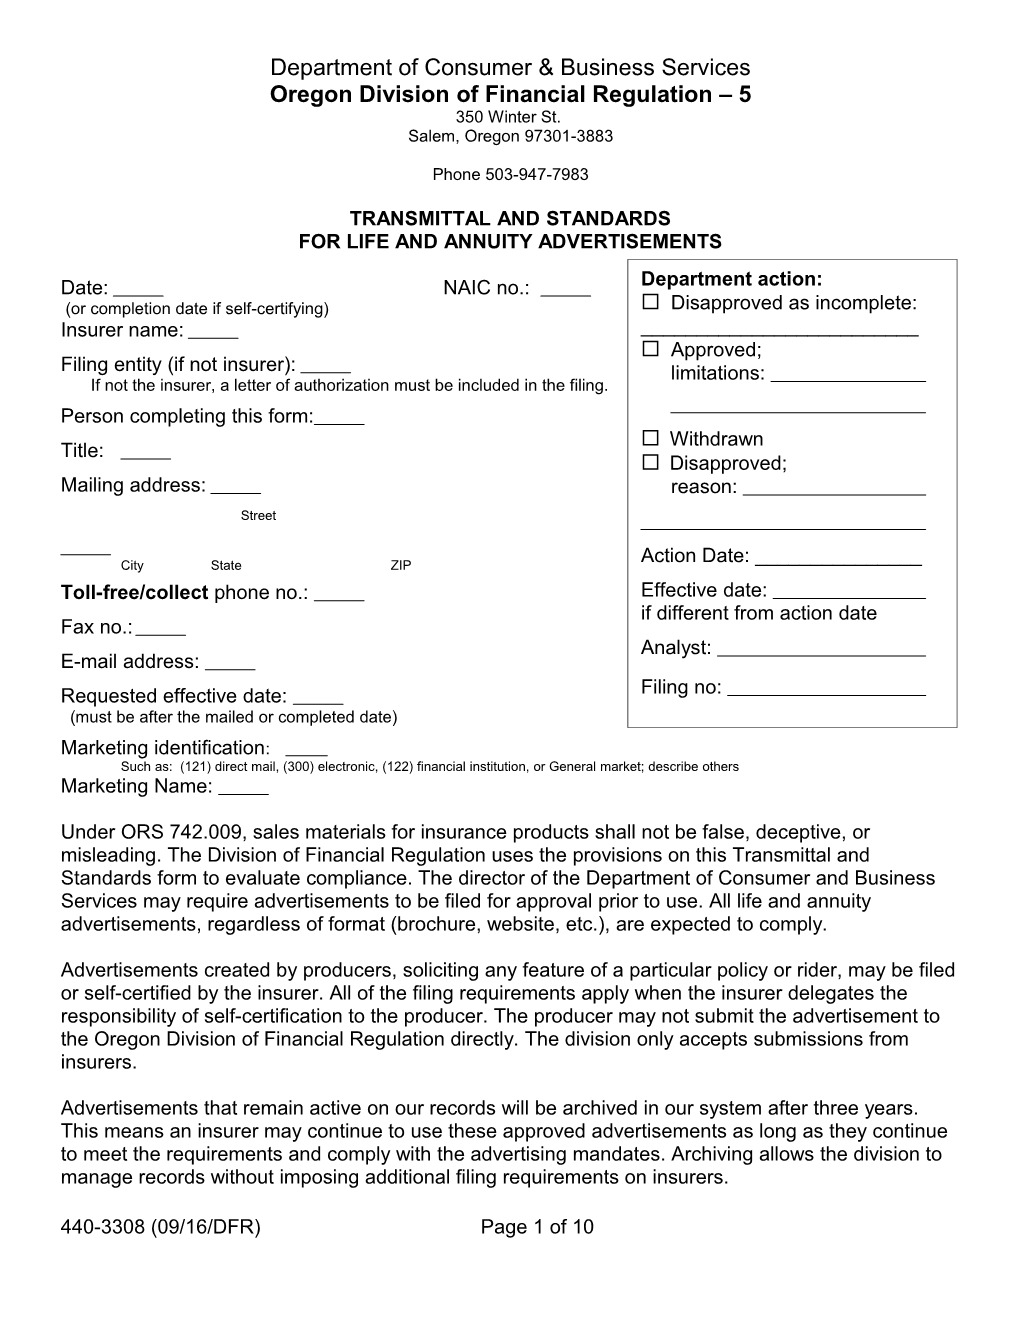 Transmittal Aand Standards for Life and Annuity Advertisements - Form 440-3308